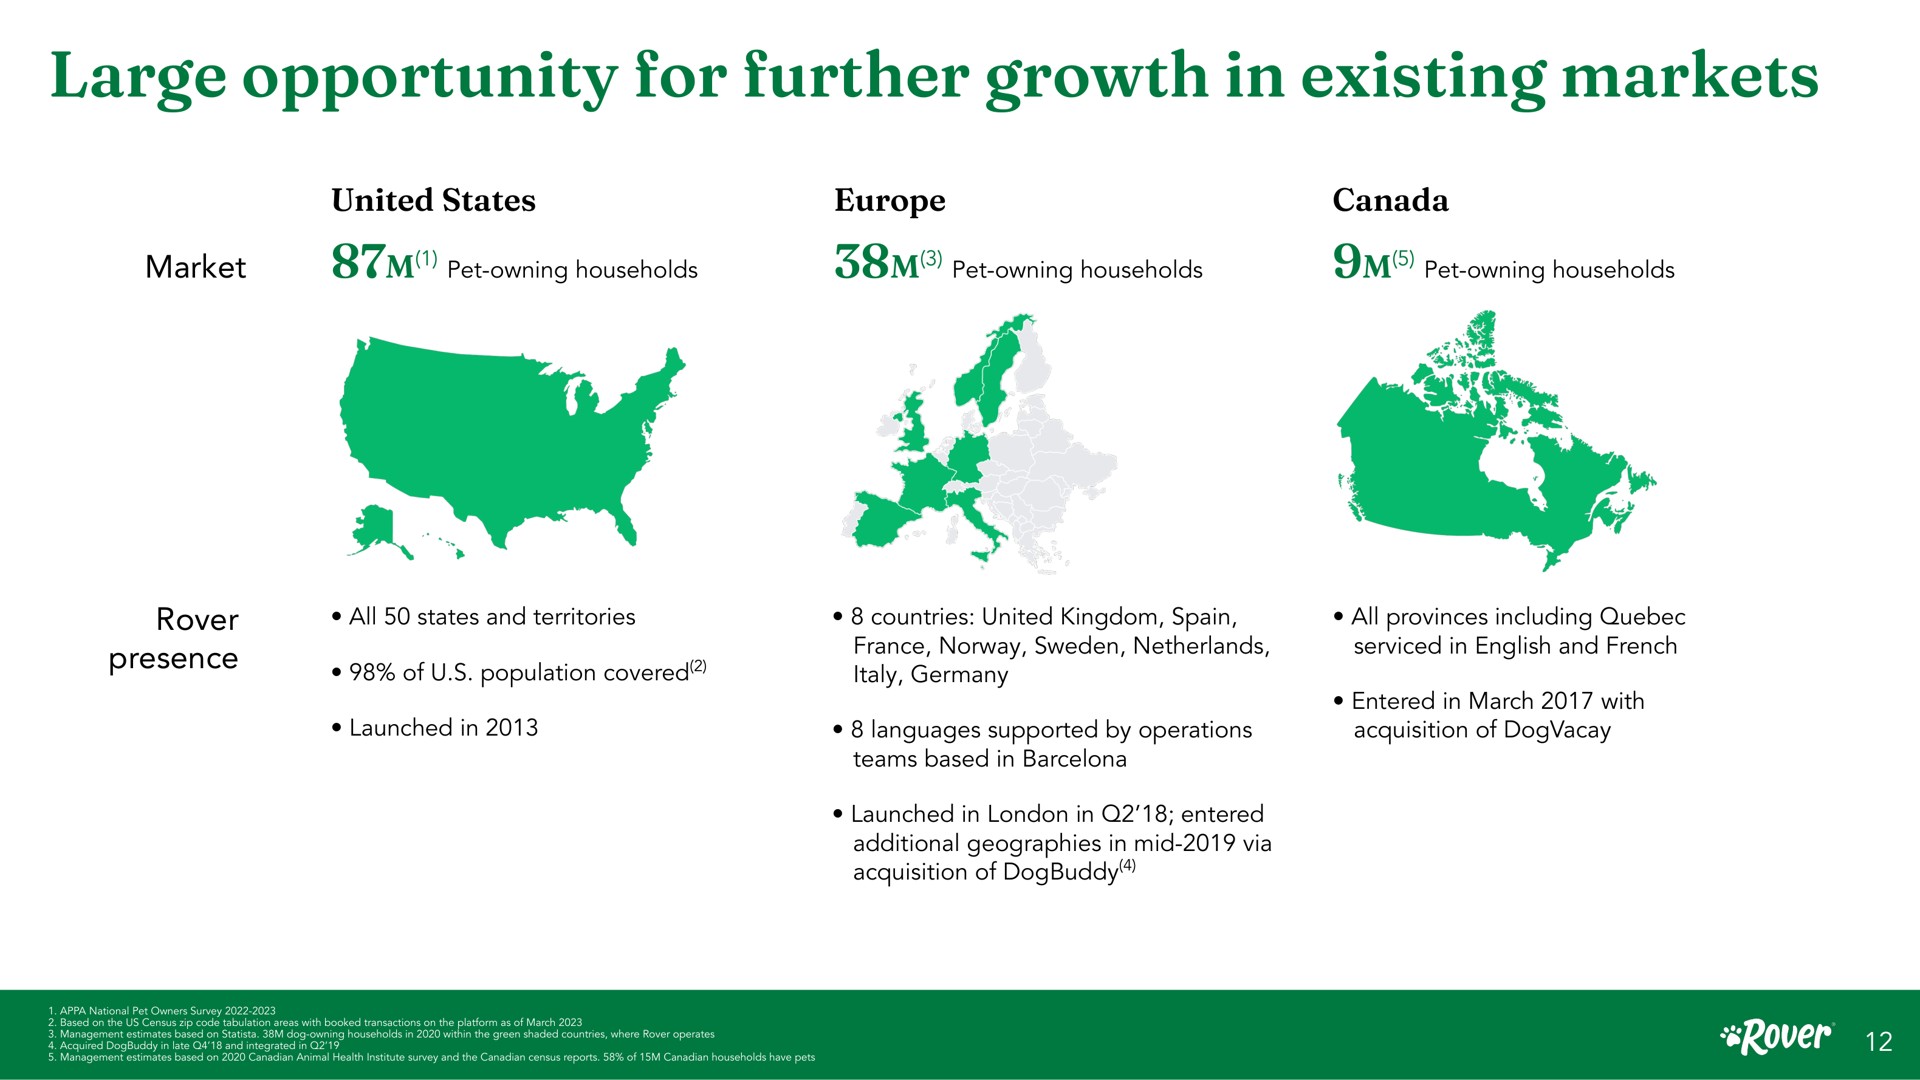 large opportunity for further growth in existing markets united states canada market pet owning households pet owning households pet owning households a rover all states and territories presence of population covered launched countries united kingdom languages supported by operations teams based barcelona launched entered additional geographies mid via acquisition of all provinces including serviced and entered march with acquisition of pea cit gos | Rover